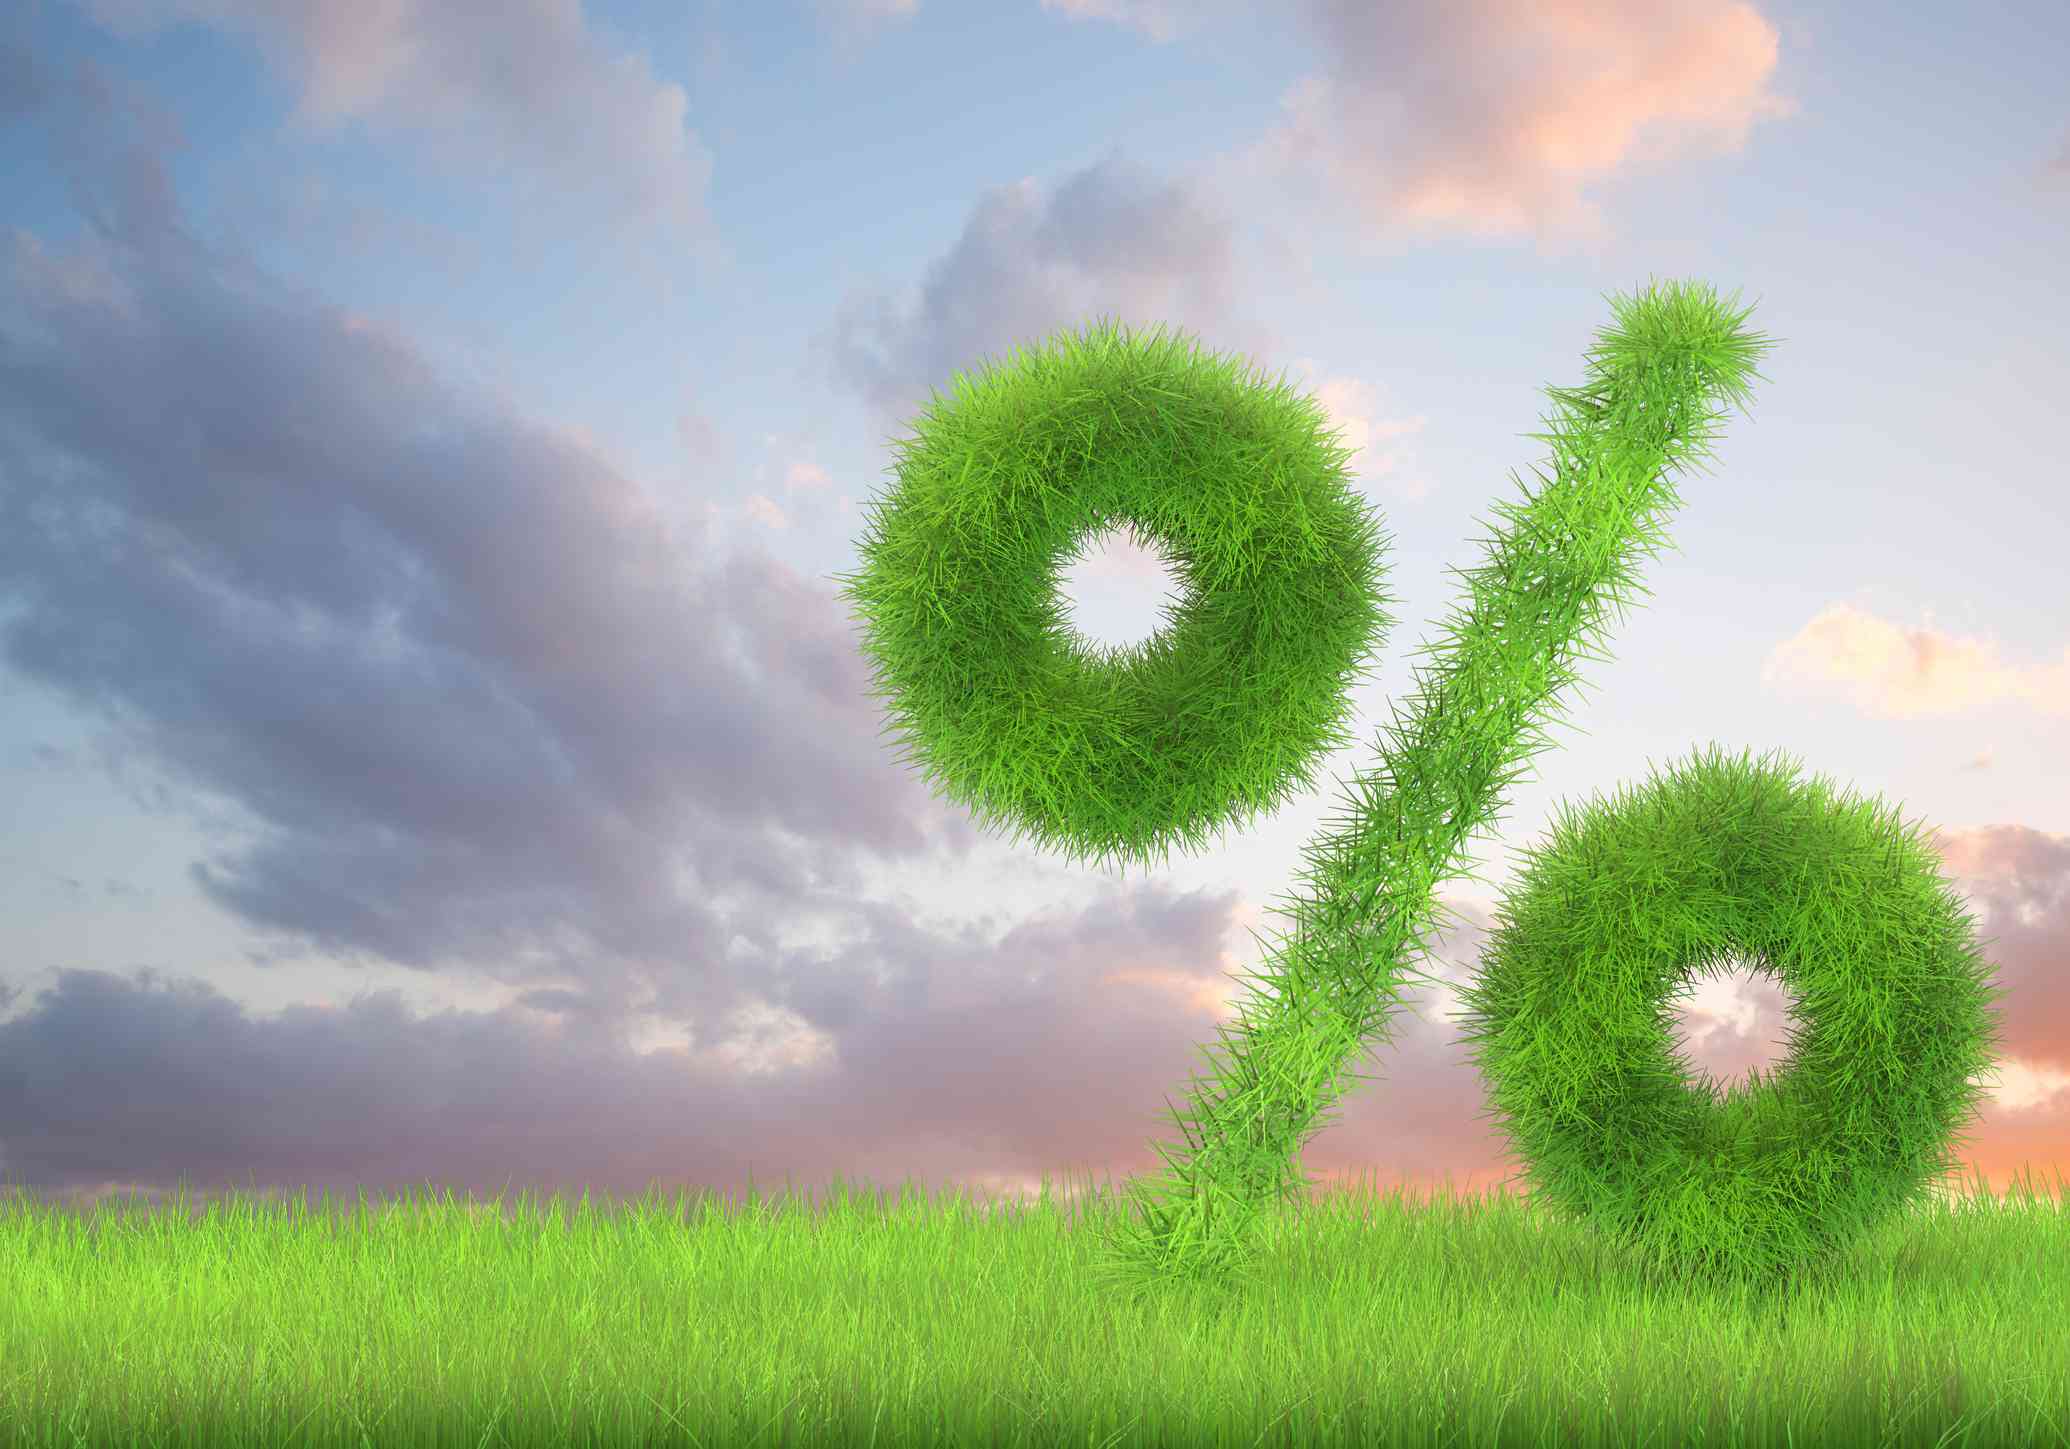 A percentage sign made of grass on a cloudy backdrop